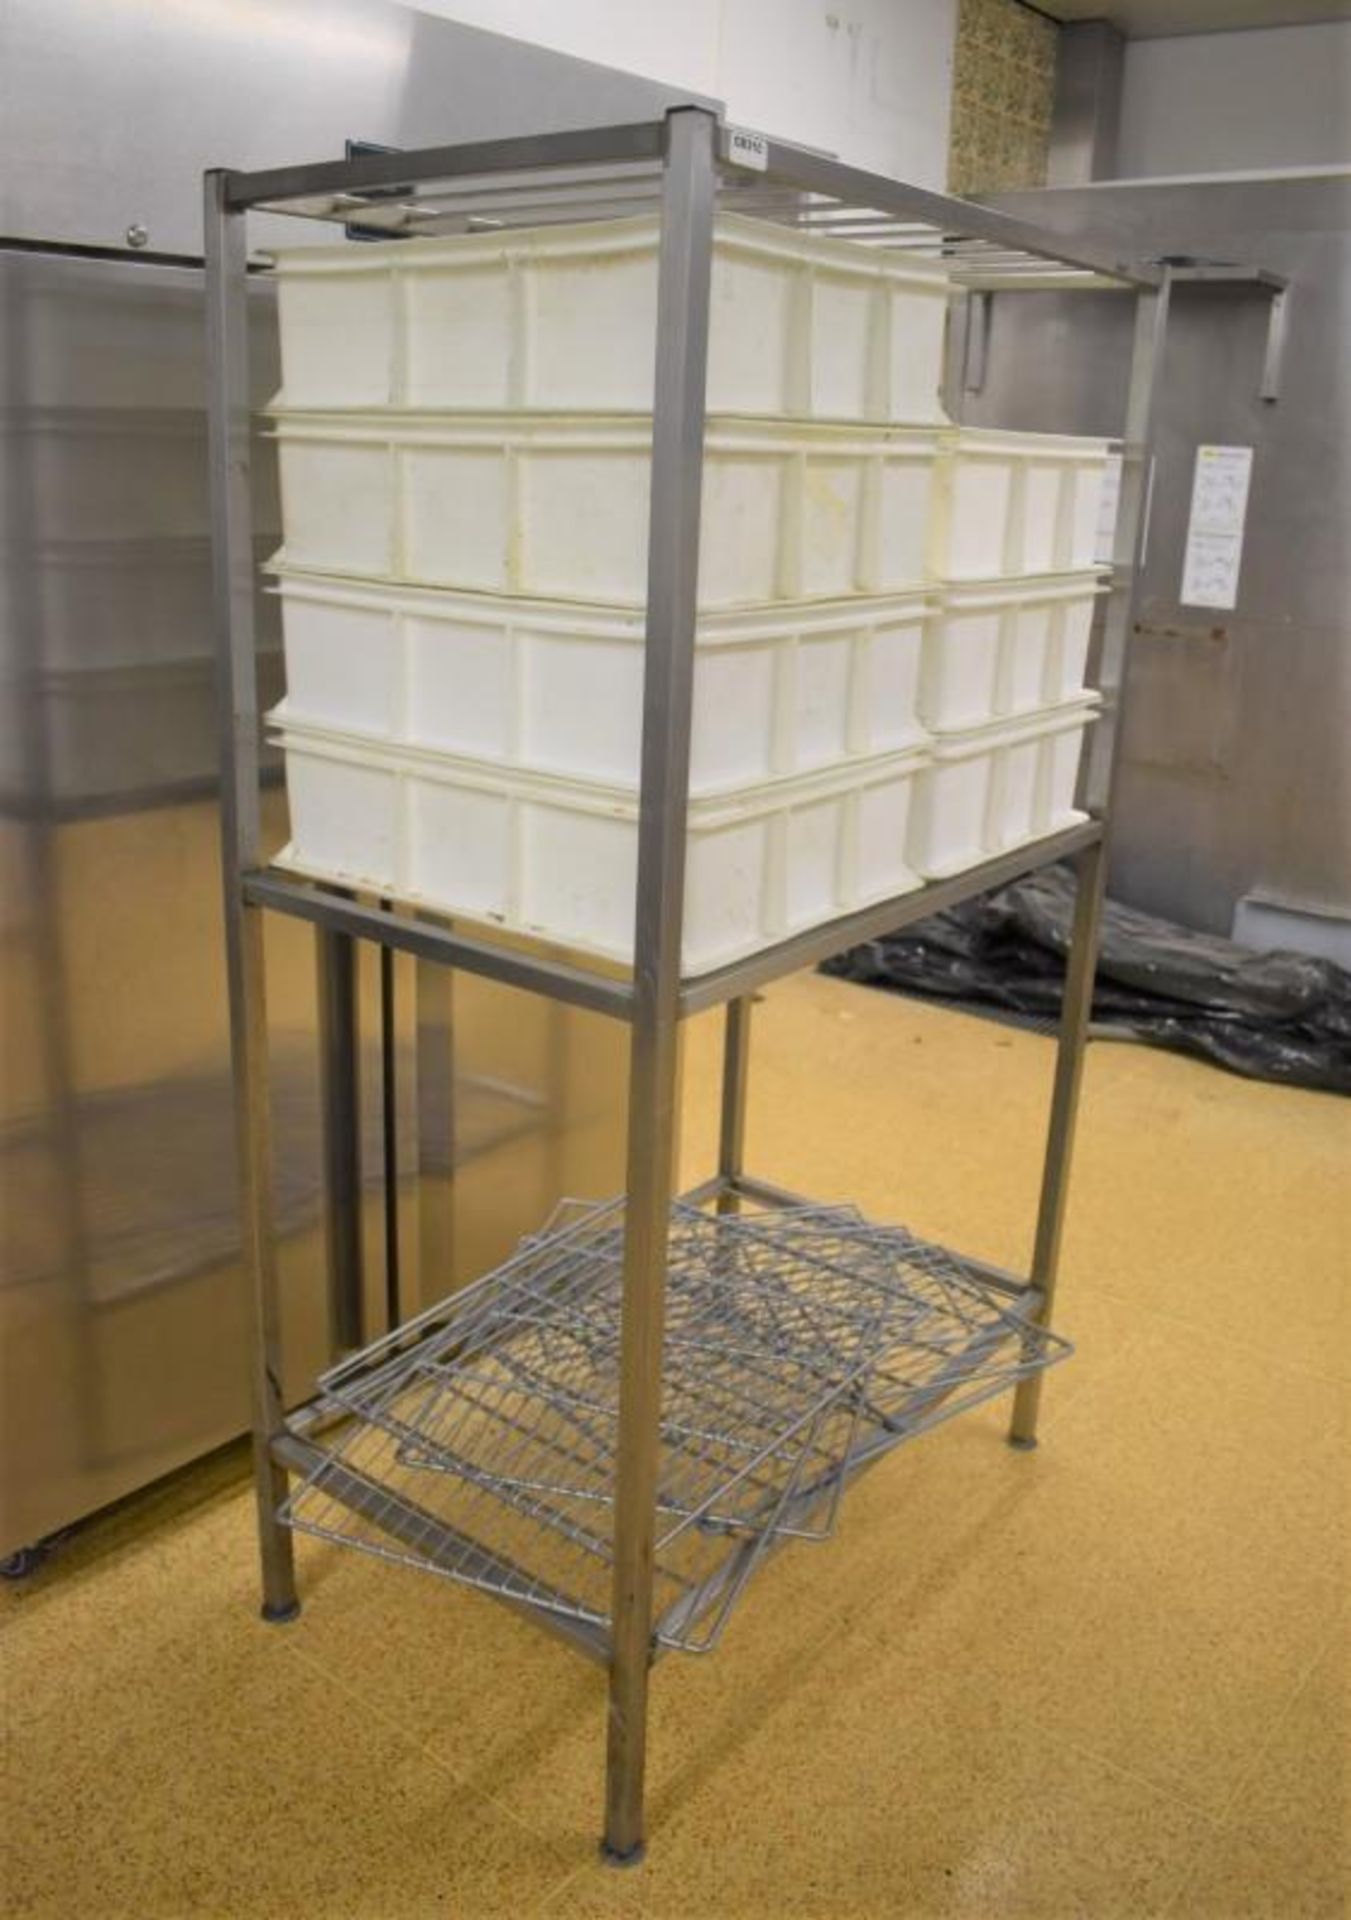 1 x Stainless Steel Upright Unit With Rail Shelves - H170 x W100 x D60 cms - CL455 - Ref CB310 - Lo